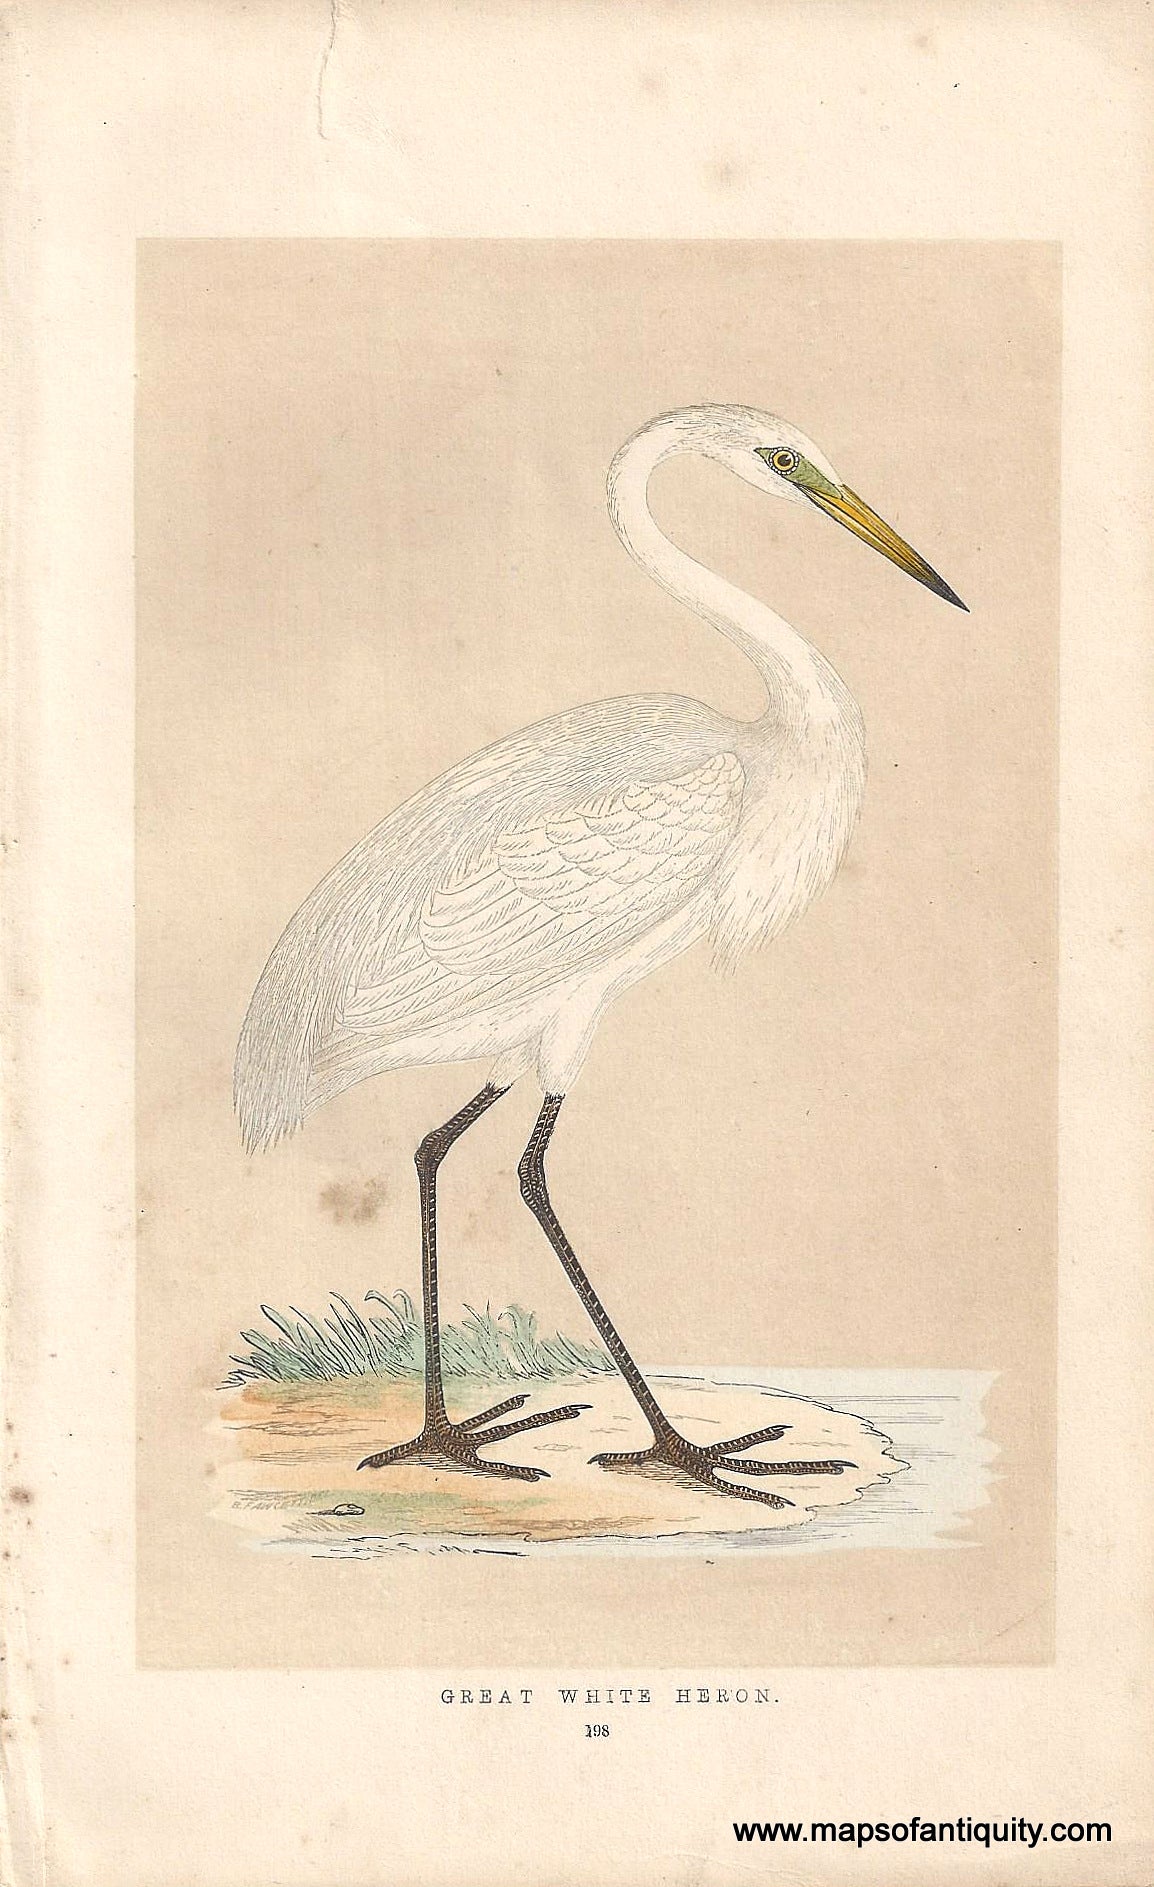 Antique-Print-Great-White-Heron-Natural-History-Birds-1890s-Maps-Of-Antiquity